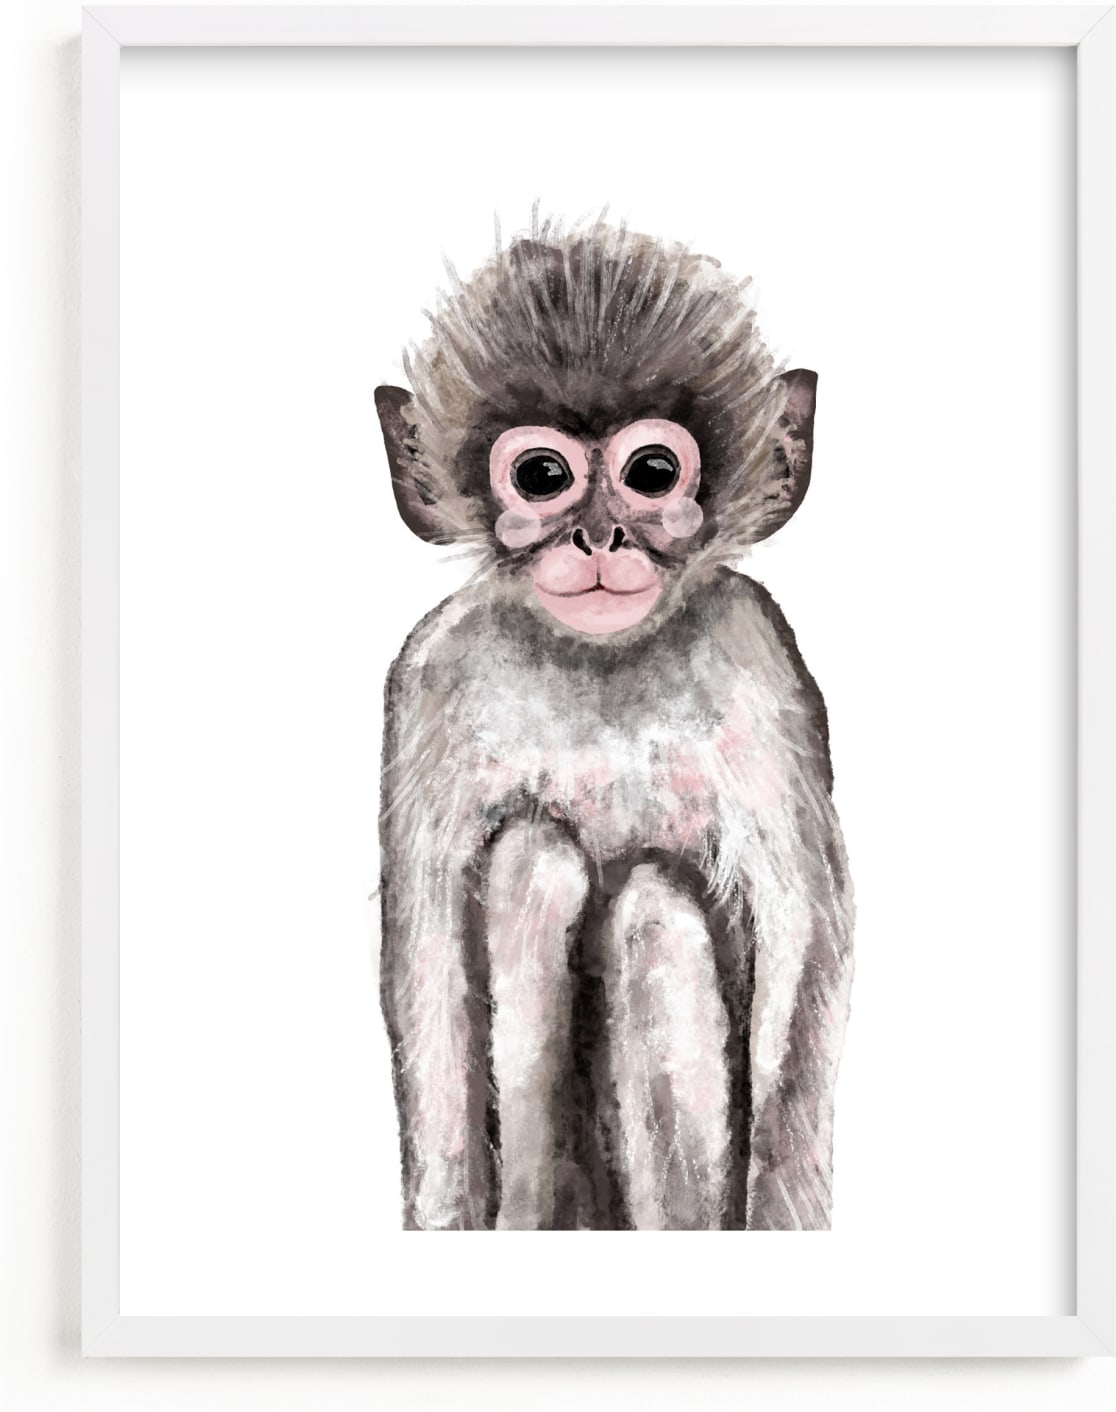 This is a brown art by Cass Loh called Baby Animal Monkey.